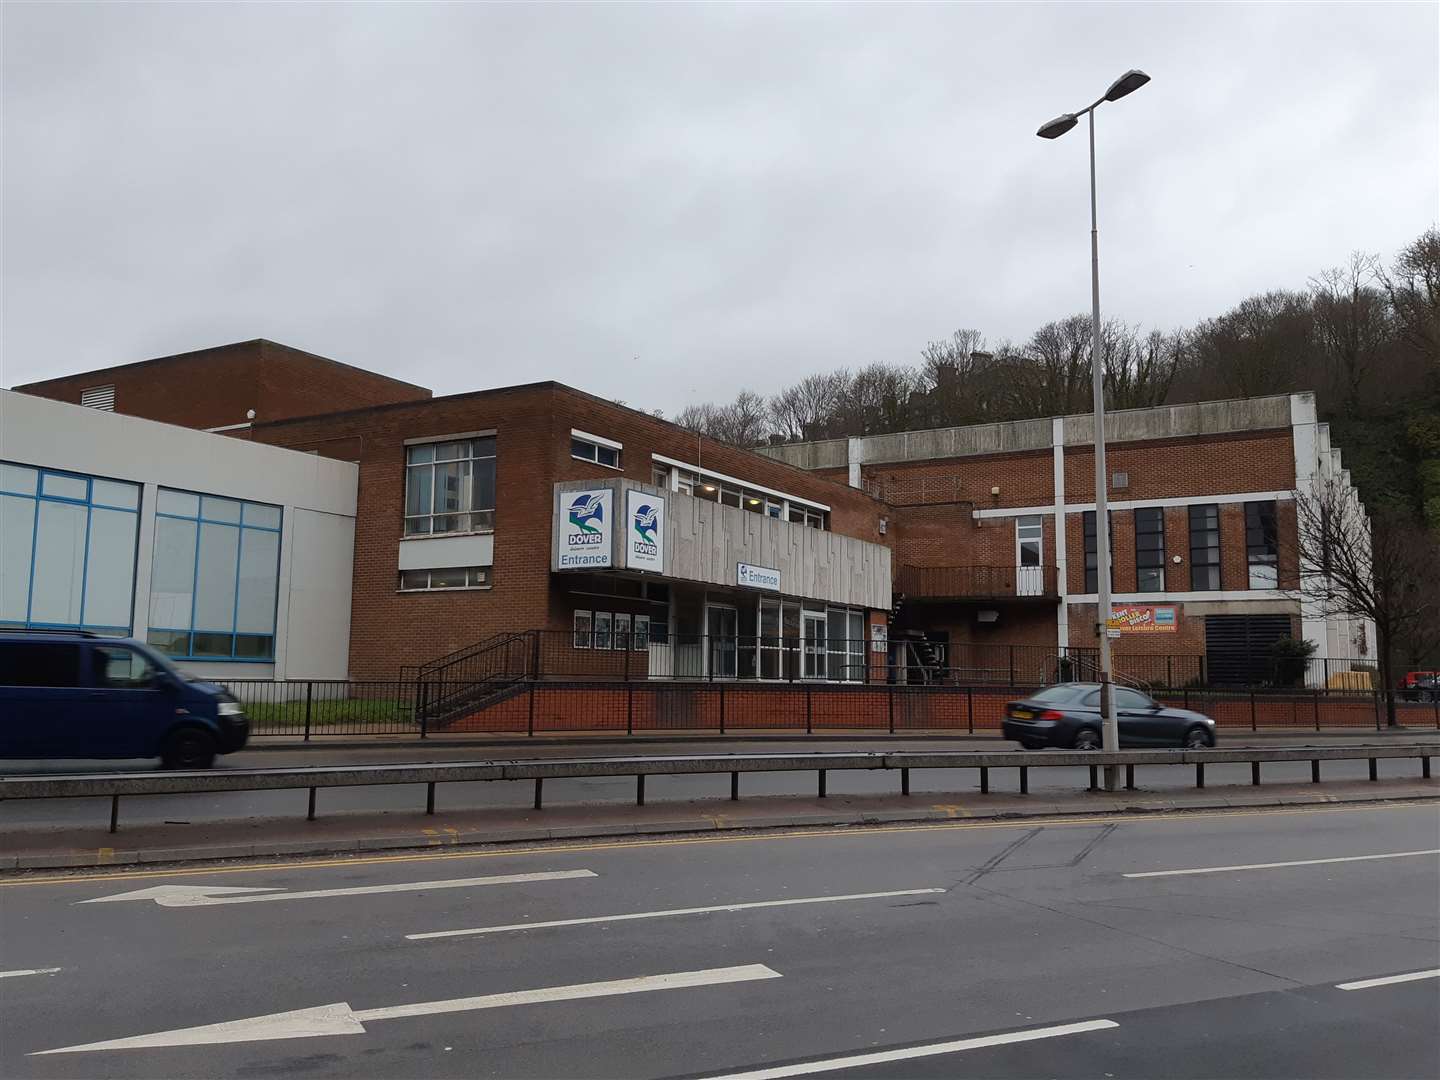 Dover Leisure Centre in its last month, February 2019. Picture: Sam Lennon